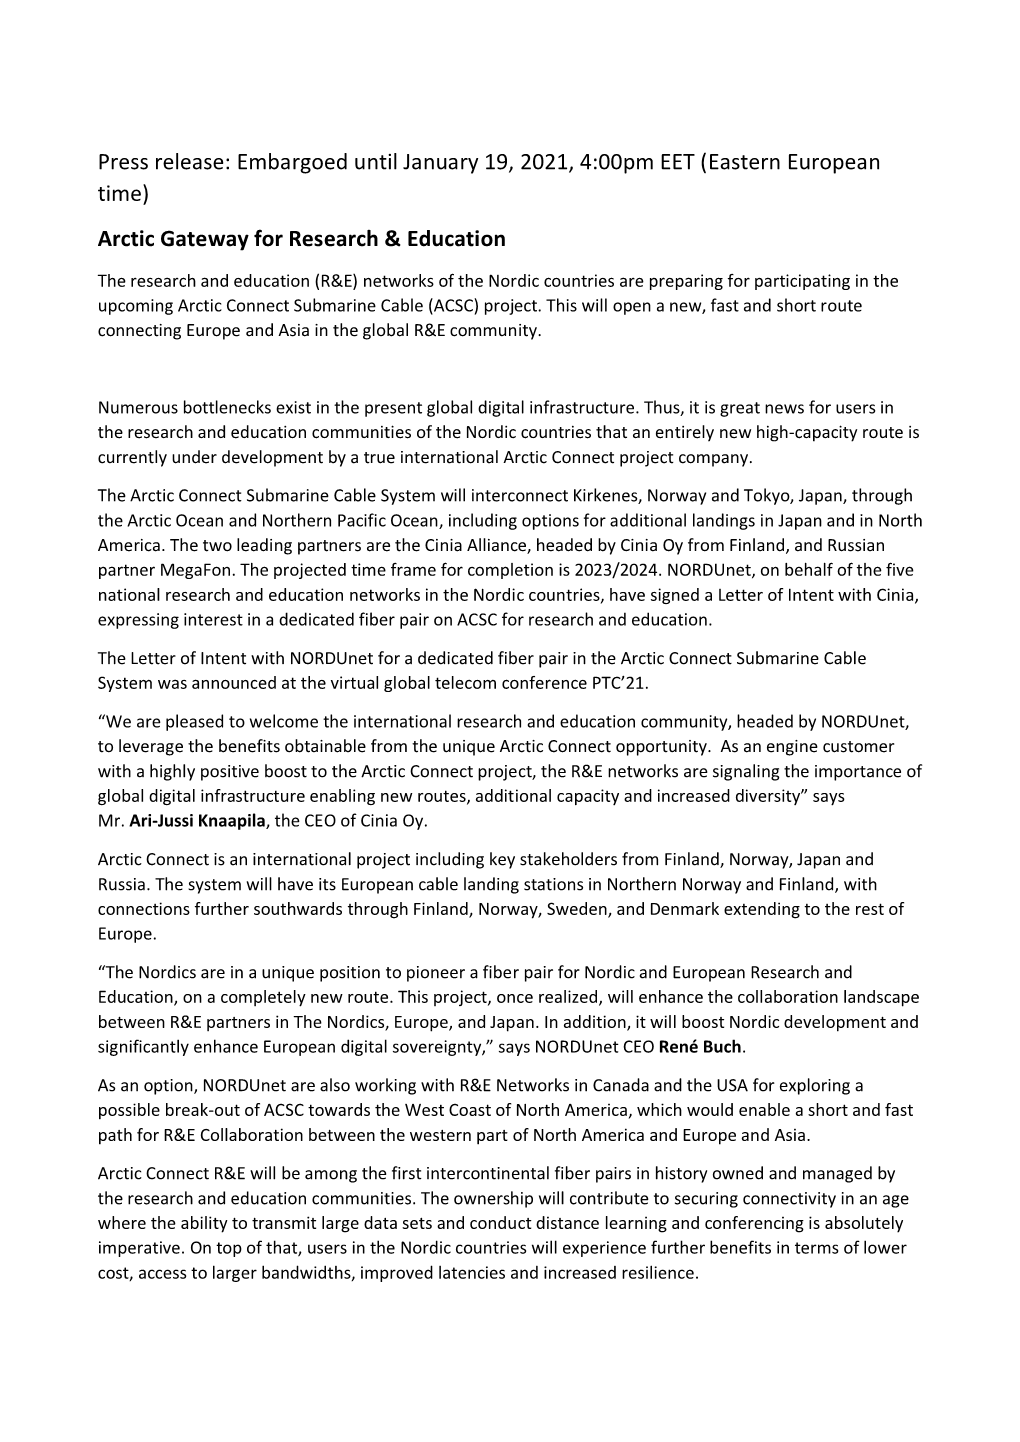 Press Release: Embargoed Until January 19, 2021, 4:00Pm EET (Eastern European Time) Arctic Gateway for Research & Education